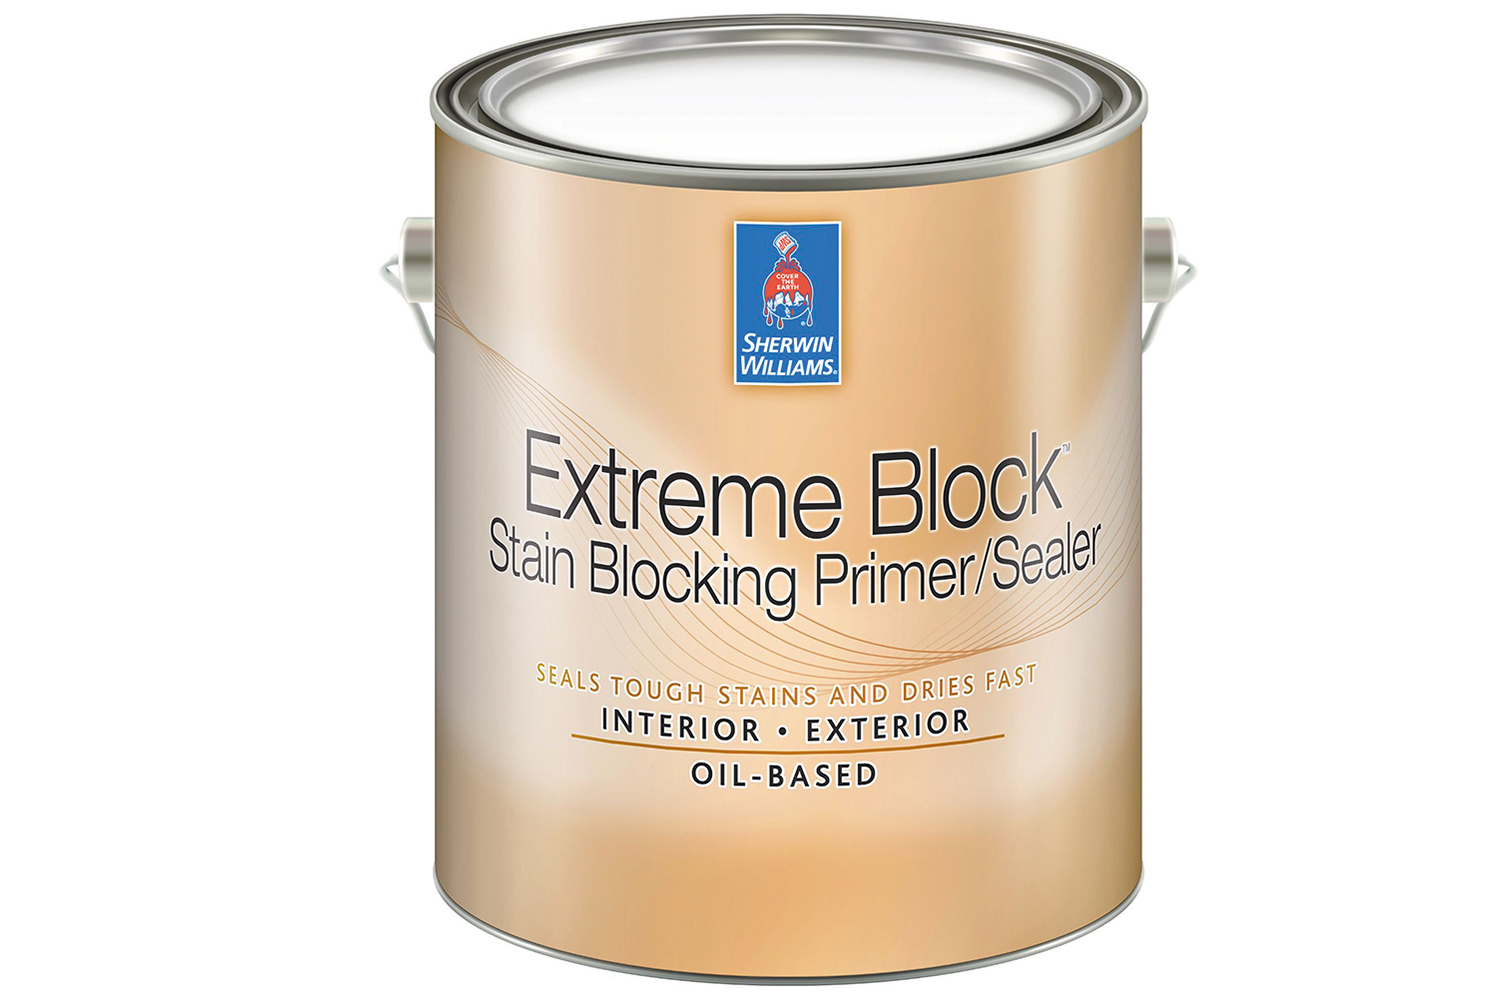 The new oil-based primer reduces the need for repaints by sealing off stains such as smoke fire and nicotine